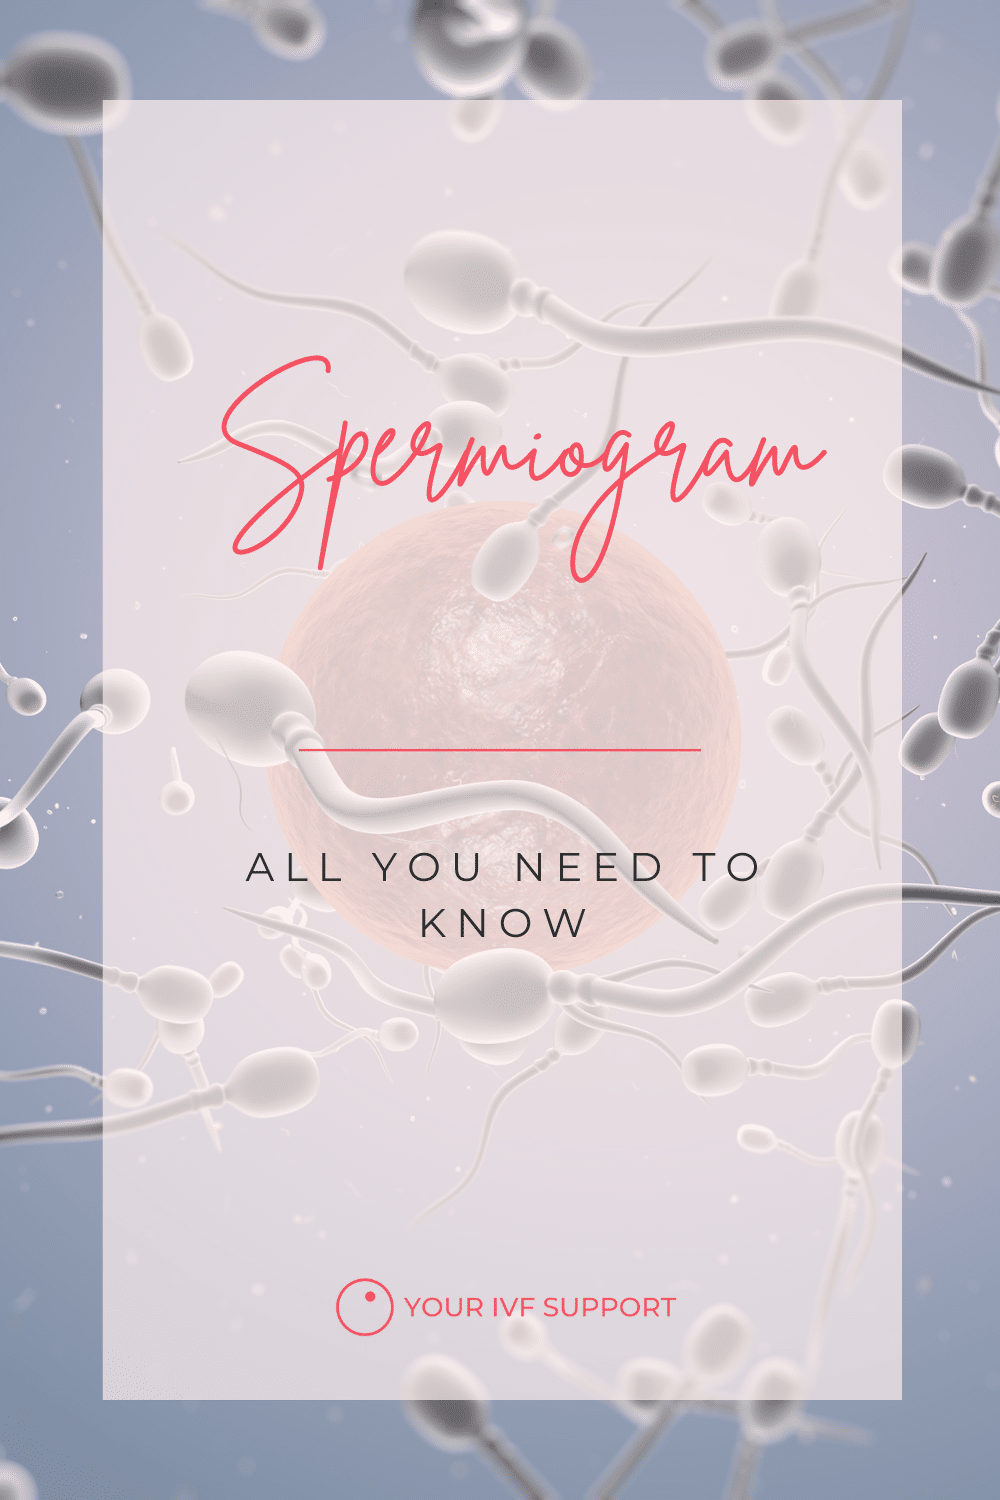 Understanding Spermiogram: A Key to Fertility and Conception